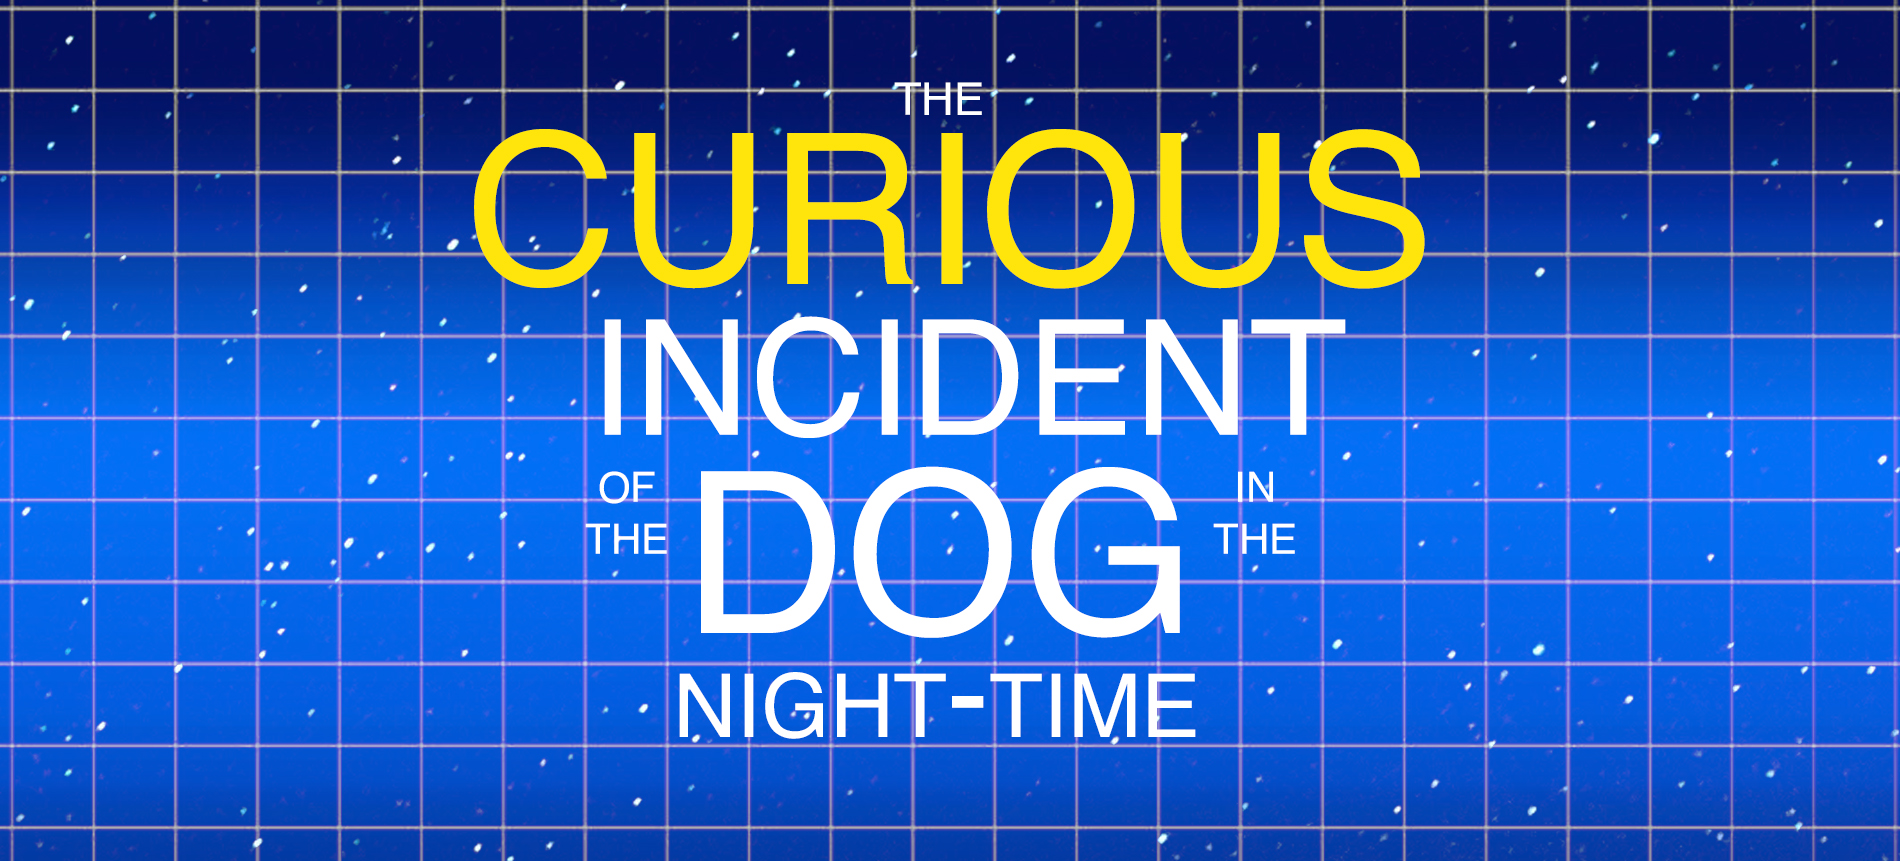 Scenic Projections for The Curious Incident of the Dog in the Night-Time